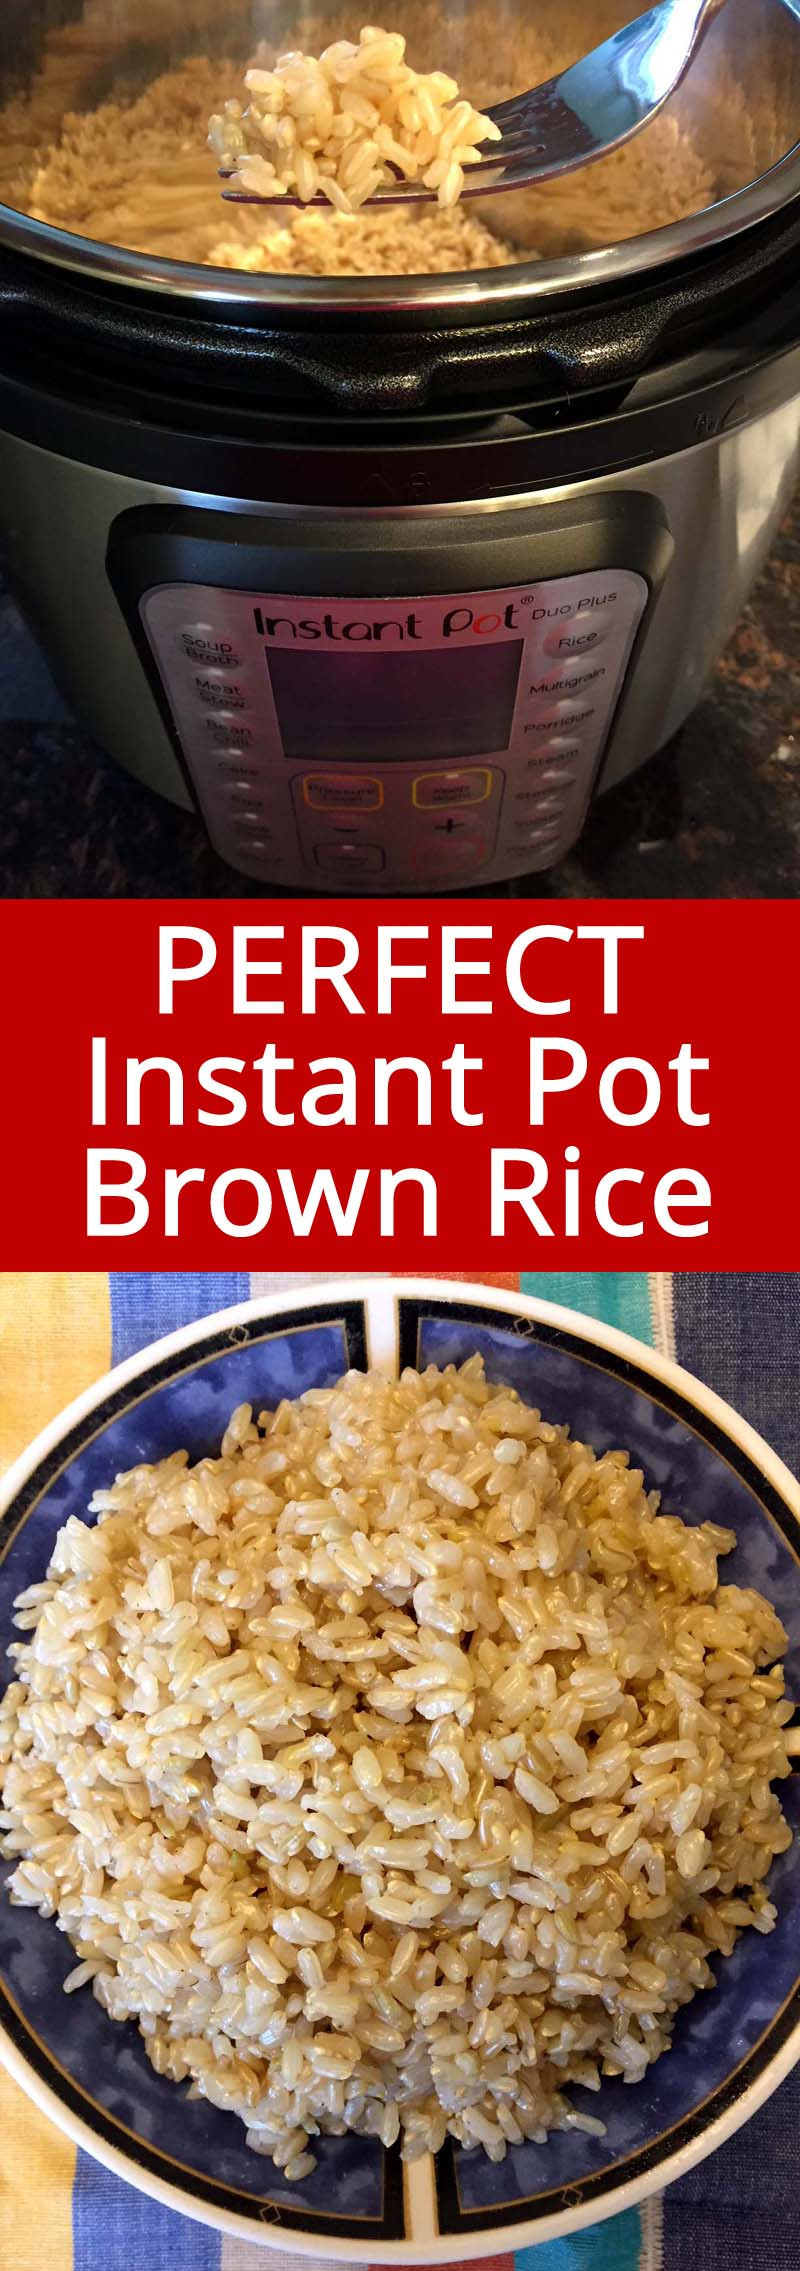 Instant Pot Brown Rice Recipe
 Instant Pot Brown Rice – How To Cook Brown Rice In A